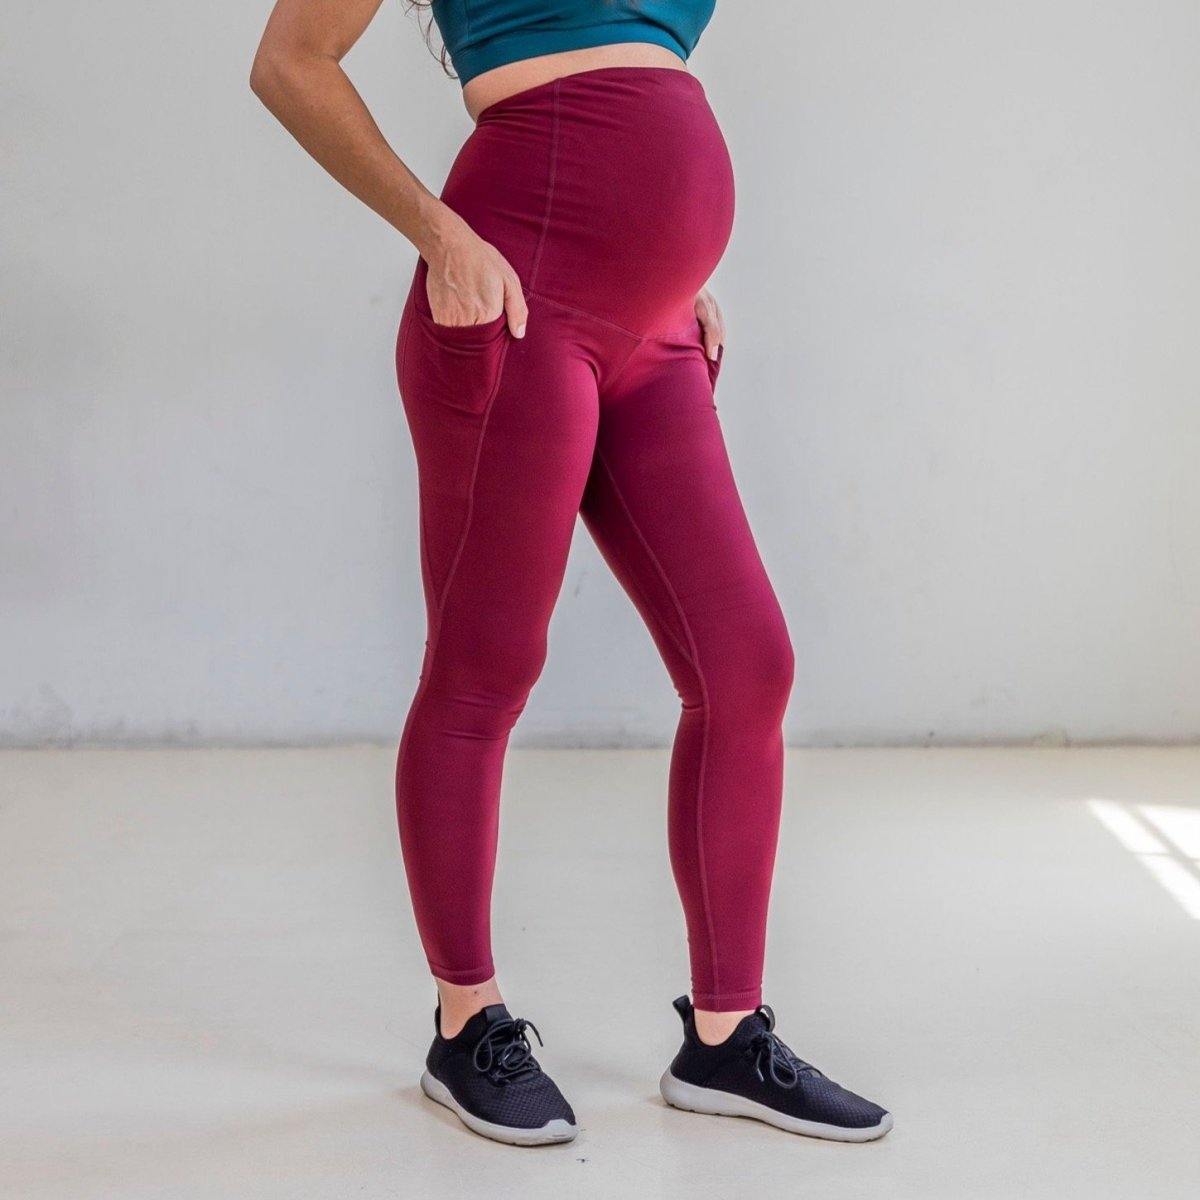 Belly Support Maternity Leggings Are Key During Pregnancy - Mumberry